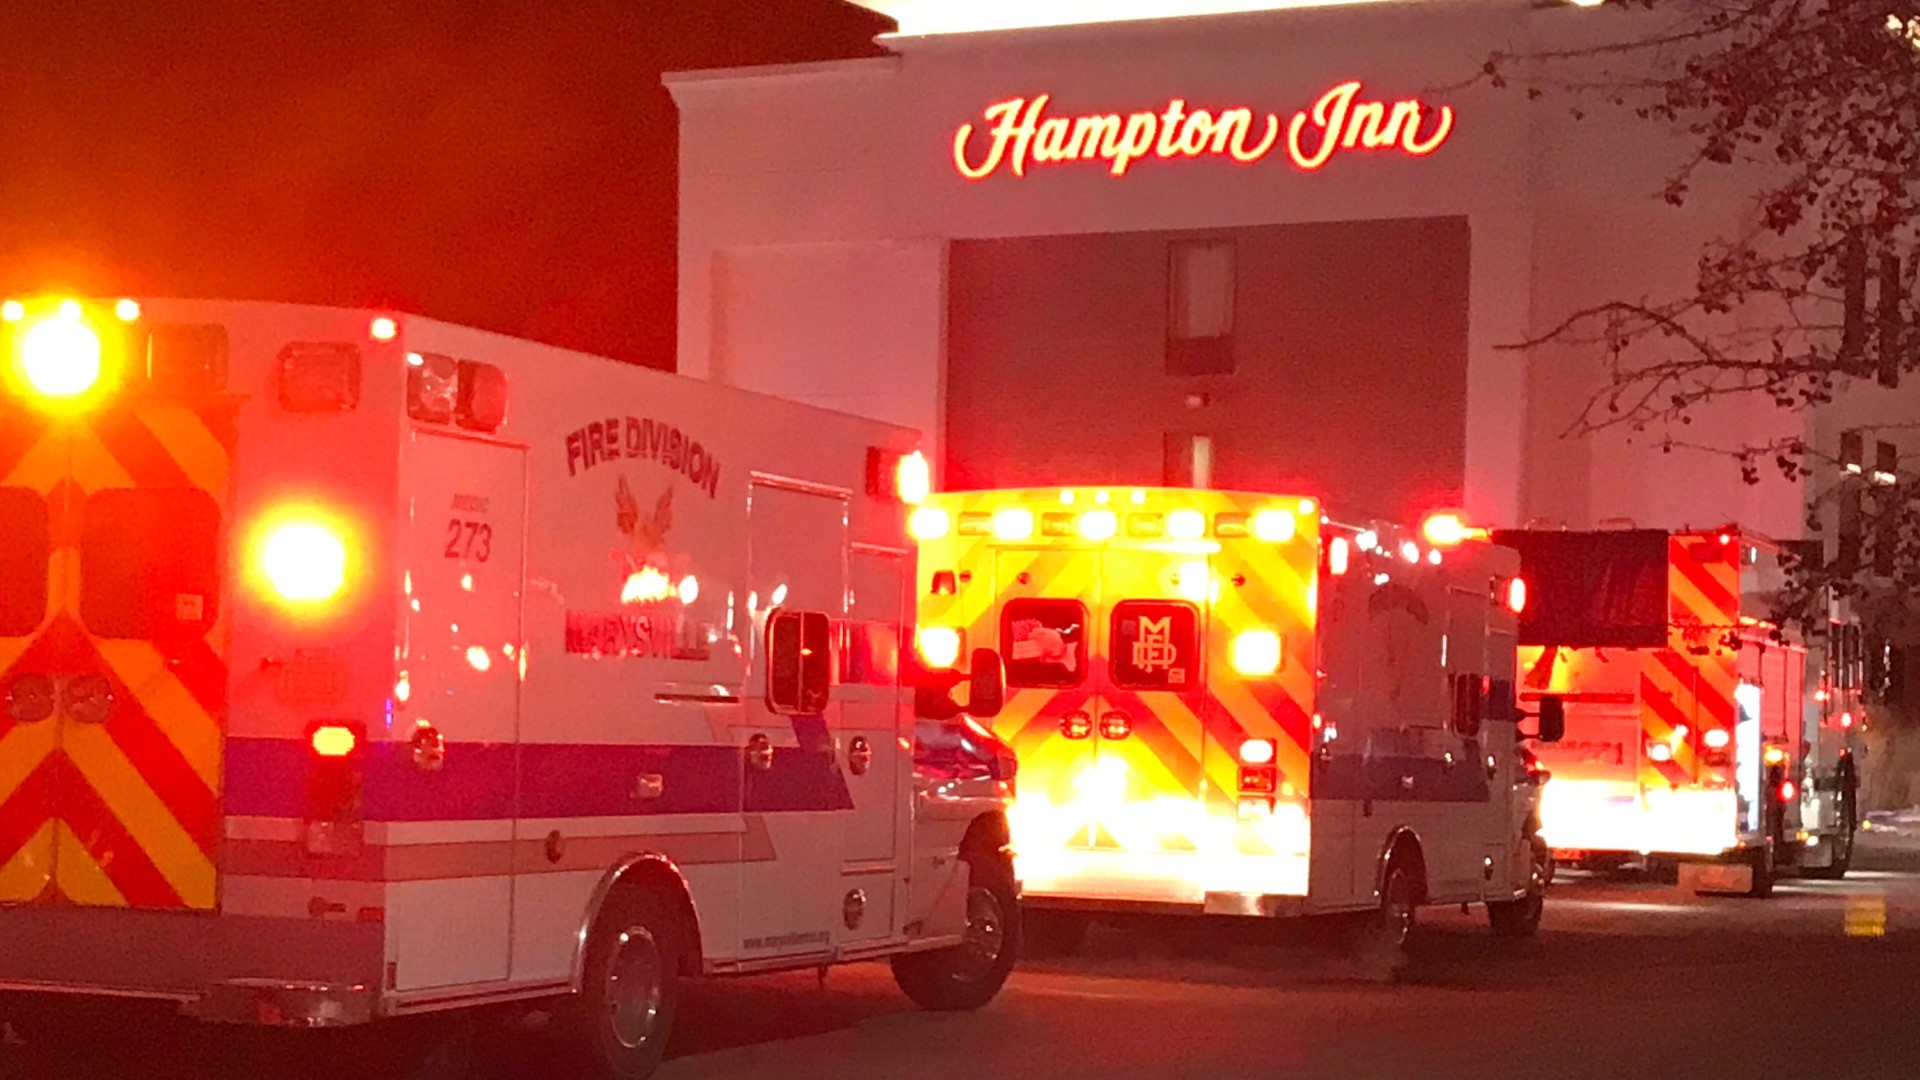 At least 14 people were hospitalized after investigators found "life-threatening" levels of carbon monoxide in the pool area at a Marysville hotel Saturday evening,